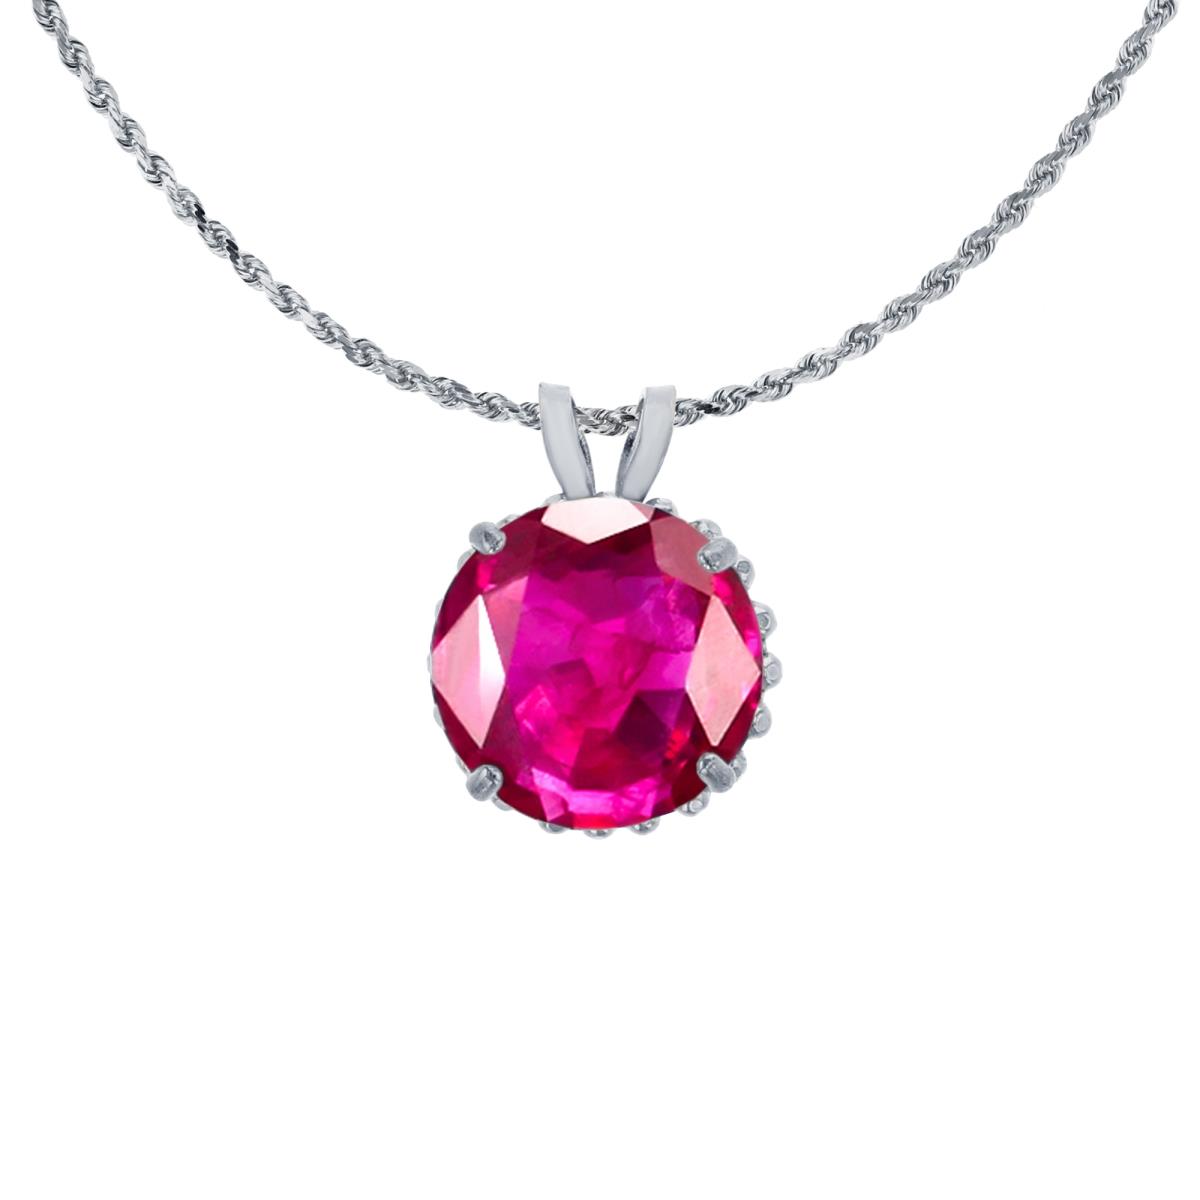 10K White Gold 7mm Rd Cut Glass Filled Ruby with Bead Frame Rabbit Ear 18" Rope Chain Necklace